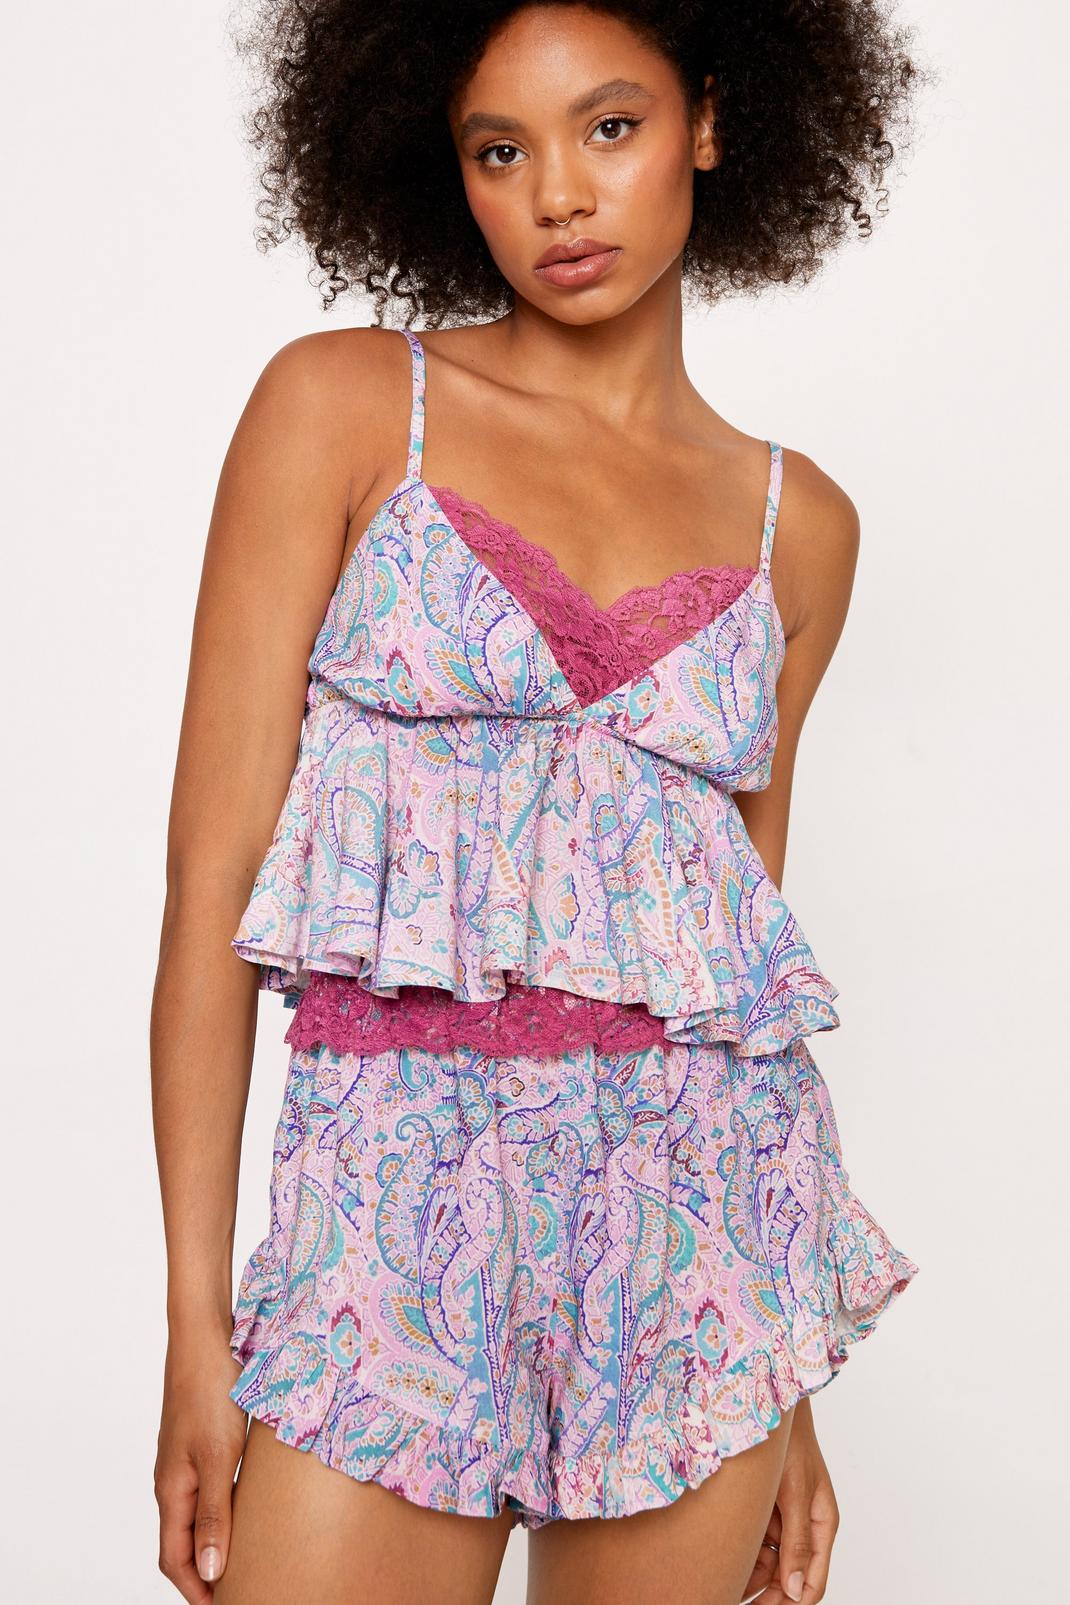 https://media.nastygal.com/i/nastygal/bgg18203_pale%20pink_xl/female-pale%20pink-paisley-lace-trim-ruffle-camisole-and-shorts-pajama-set/?w=1070&qlt=default&fmt.jp2.qlt=70&fmt=auto&sm=fit